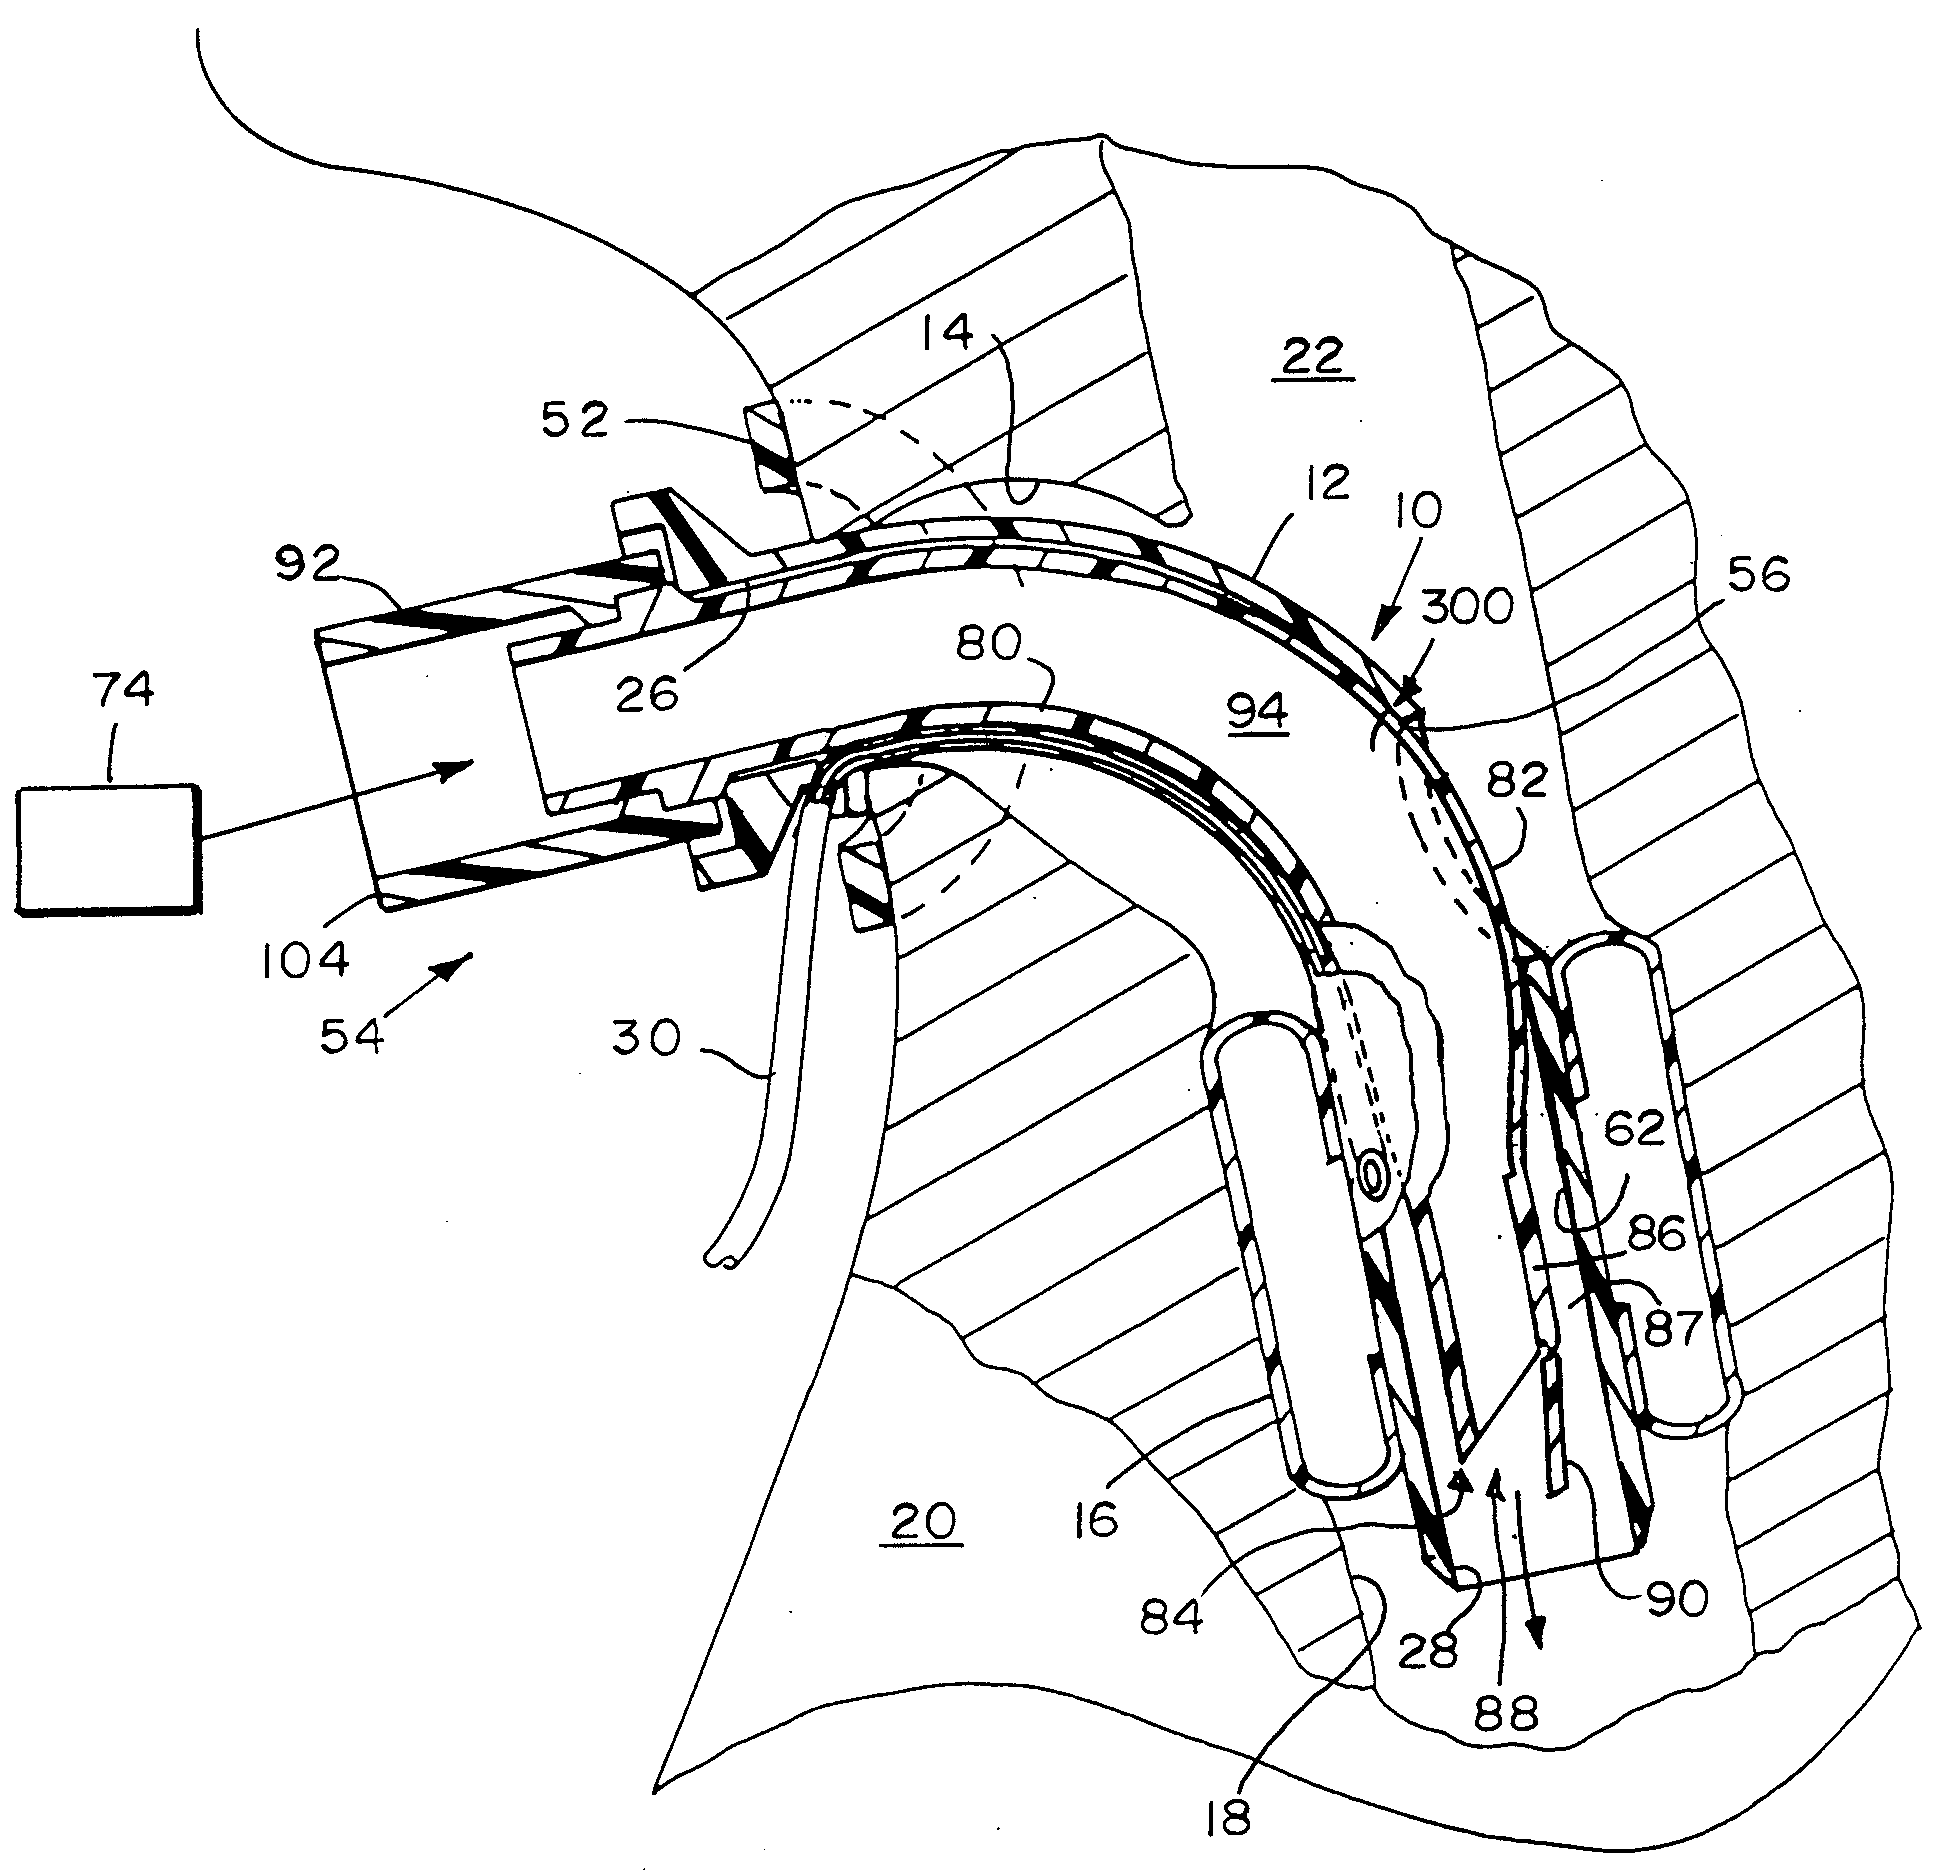 Valved Fenestrated Tracheotomy Tube Having Inner and Outer Cannulae with Pressure Relief